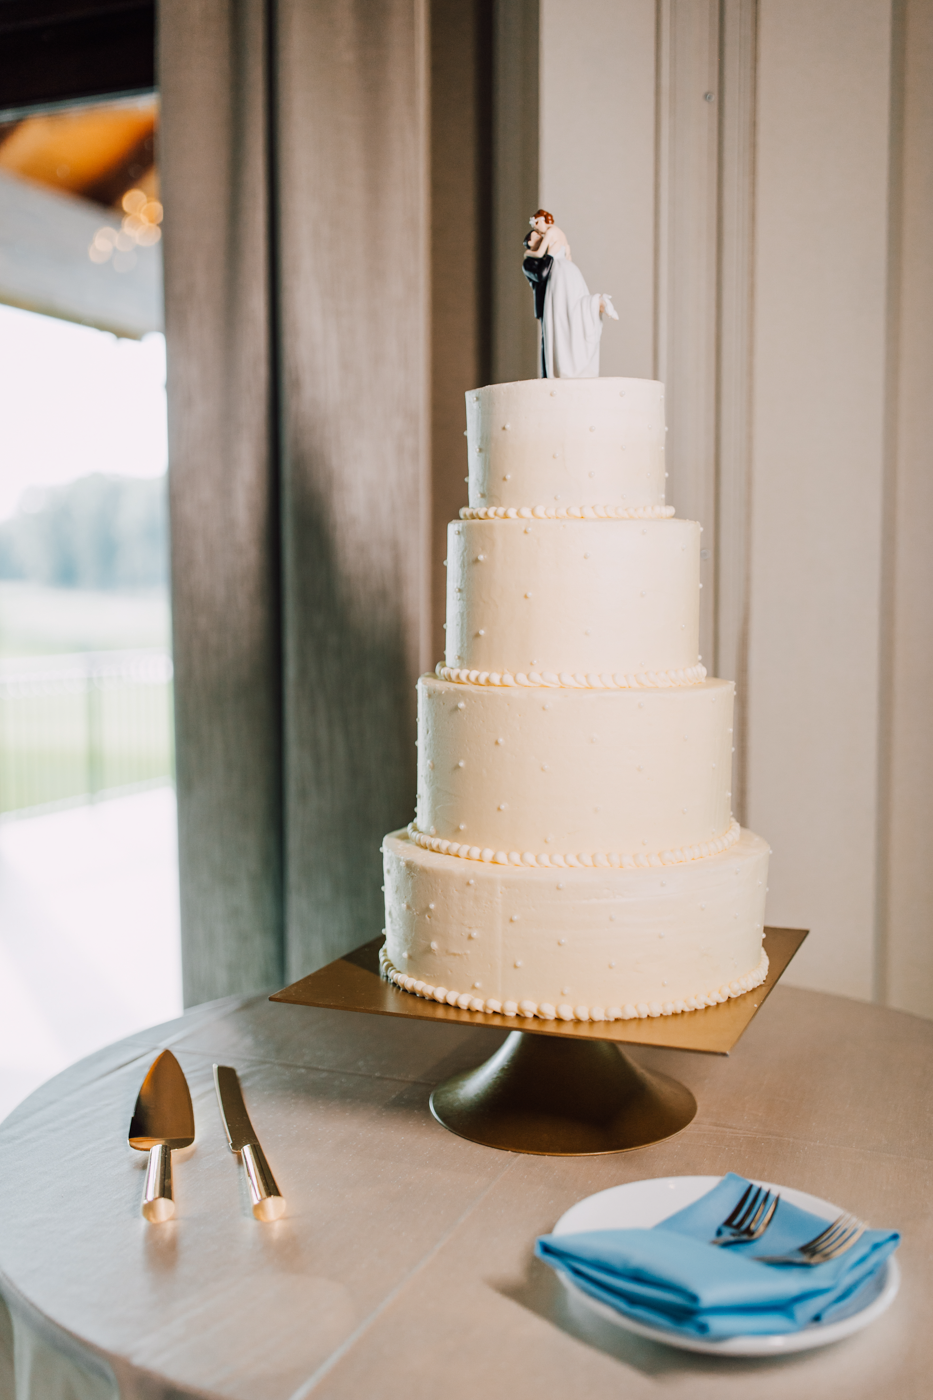  4-tier white wedding cake with simple pattern 